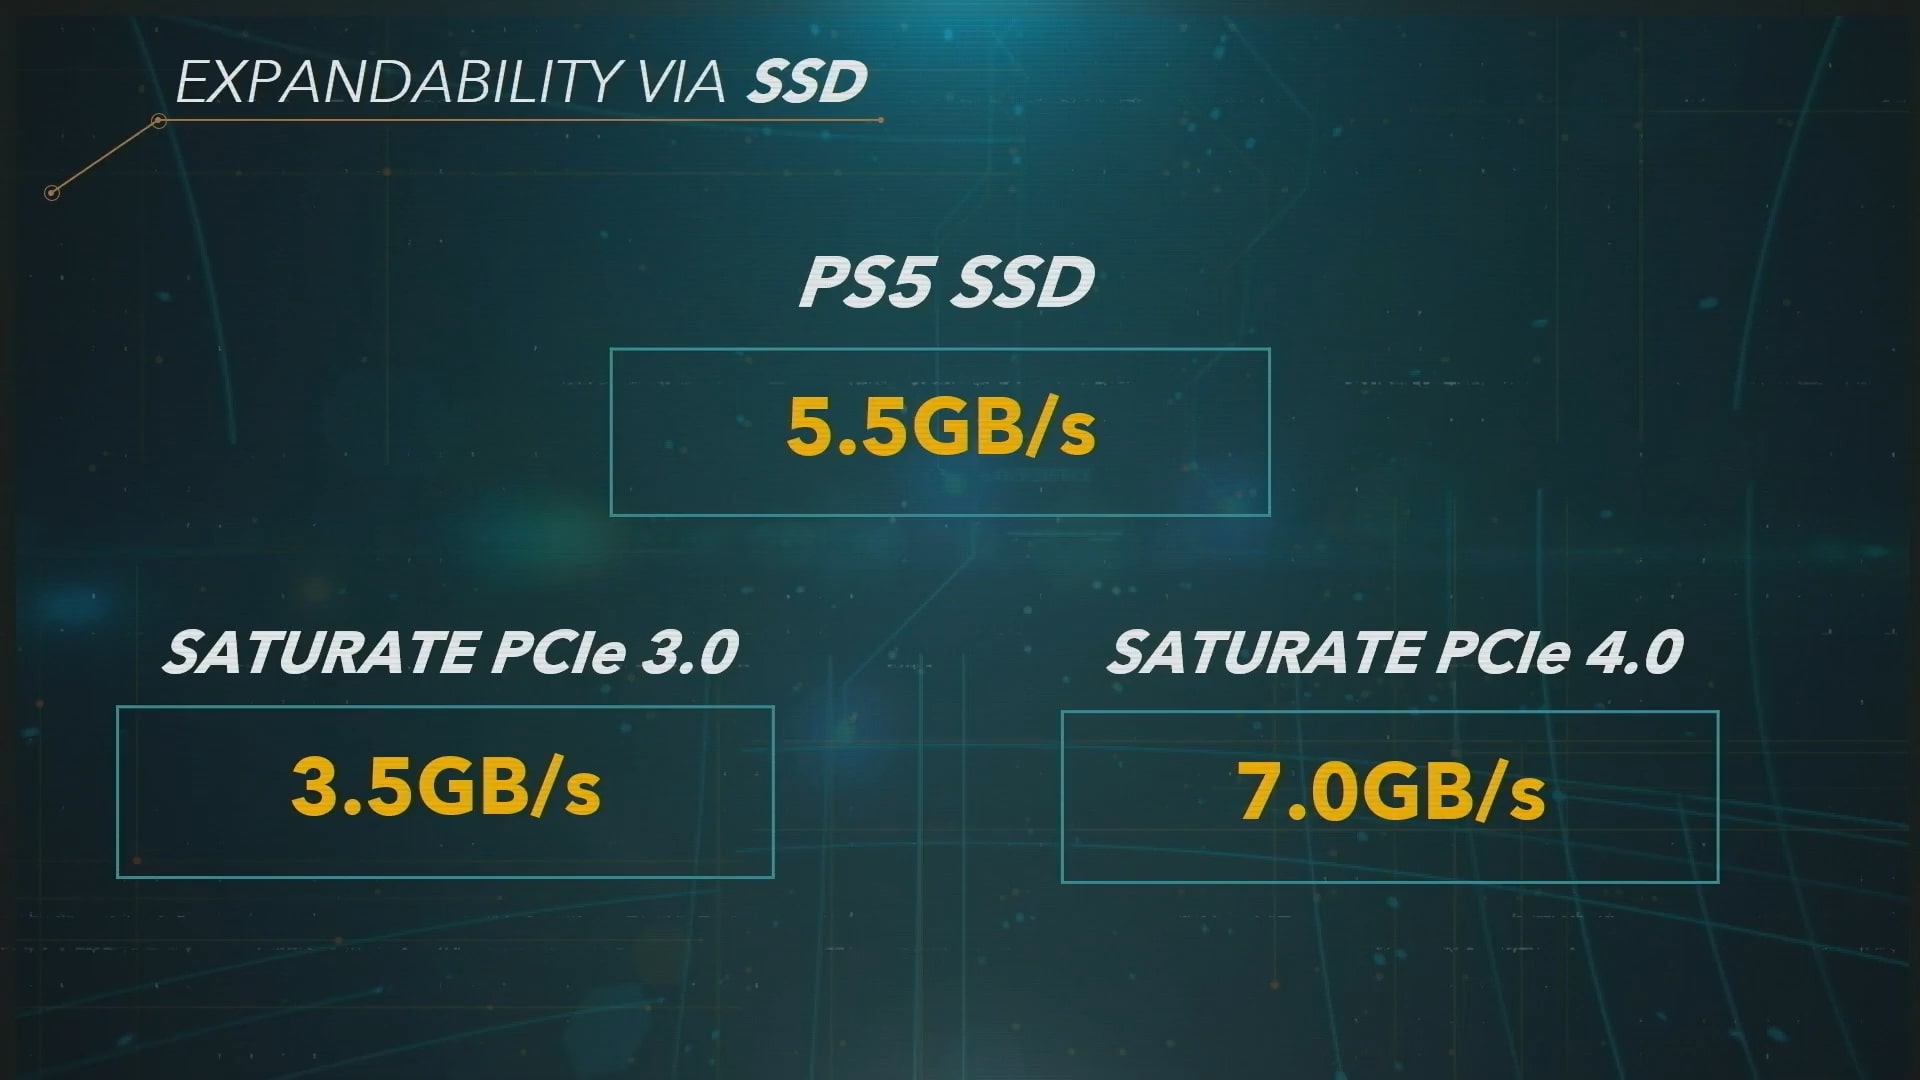 PS5 storage can be expanded with external hard drives or third